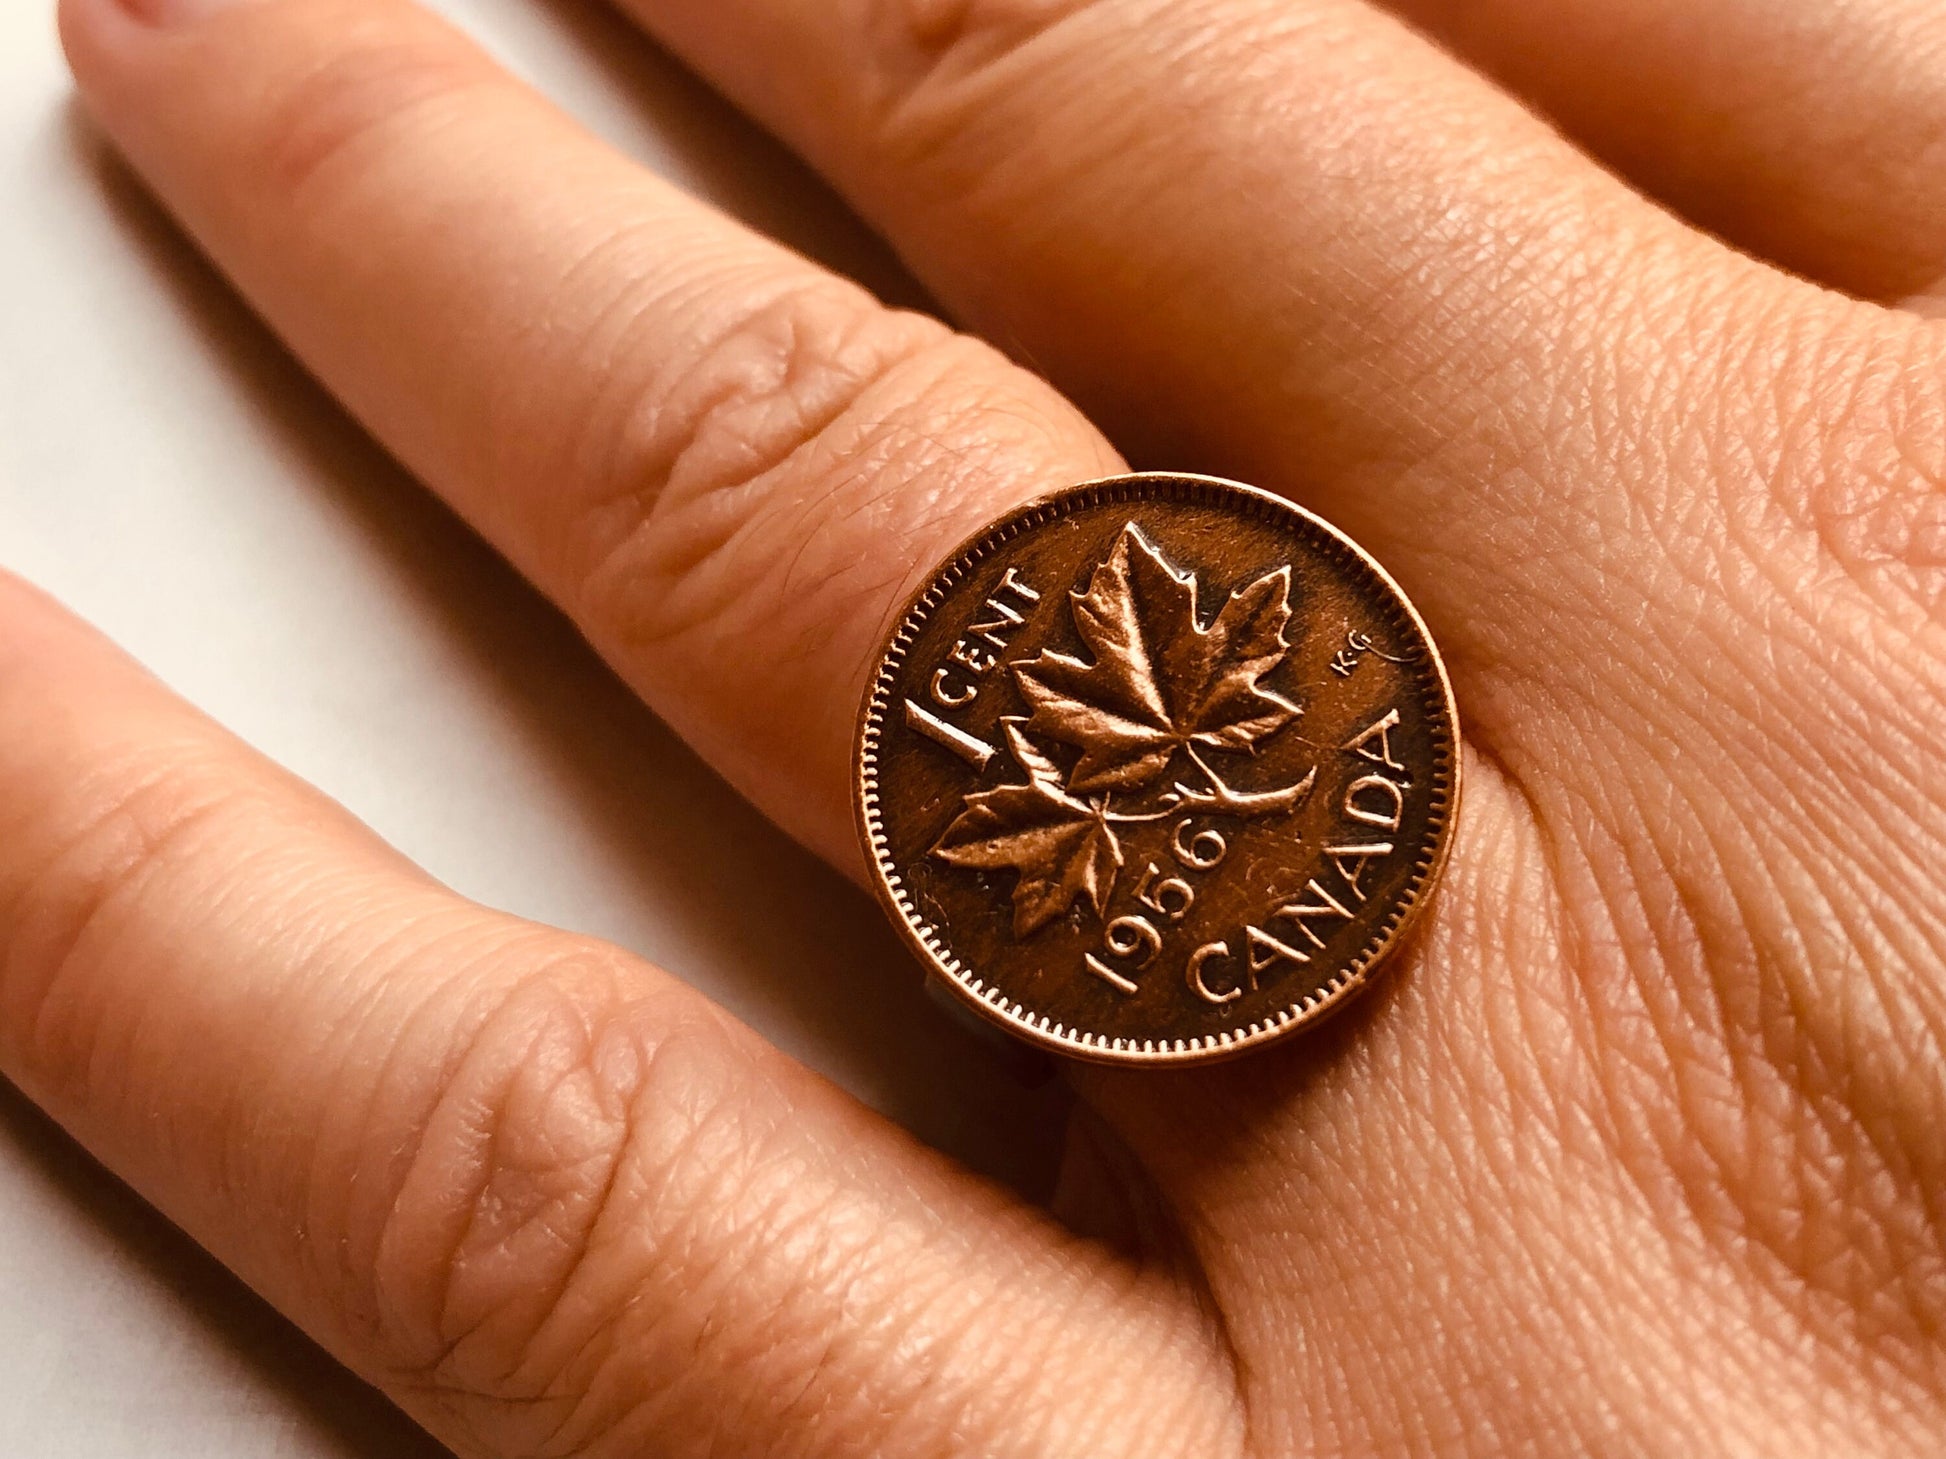 Canada One Penny Coin Ring Canadian Cent Adjustable Custom Made Personal Old Vintage Handmade Jewelry Gift Friend For Him Her World Coin